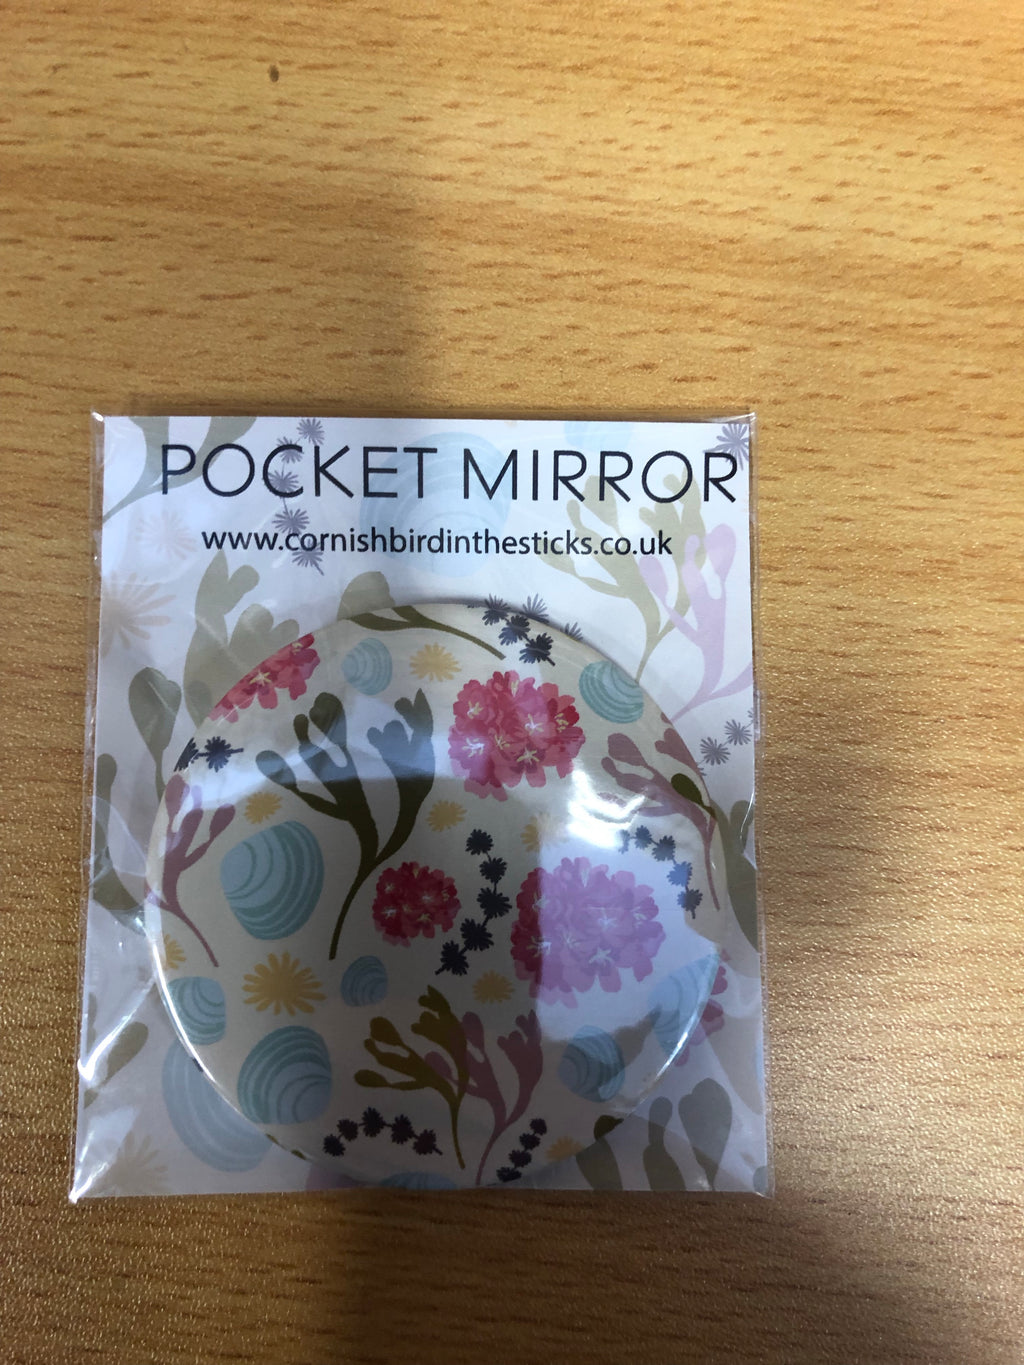 Pocket mirror and key rings designed in Cornwall